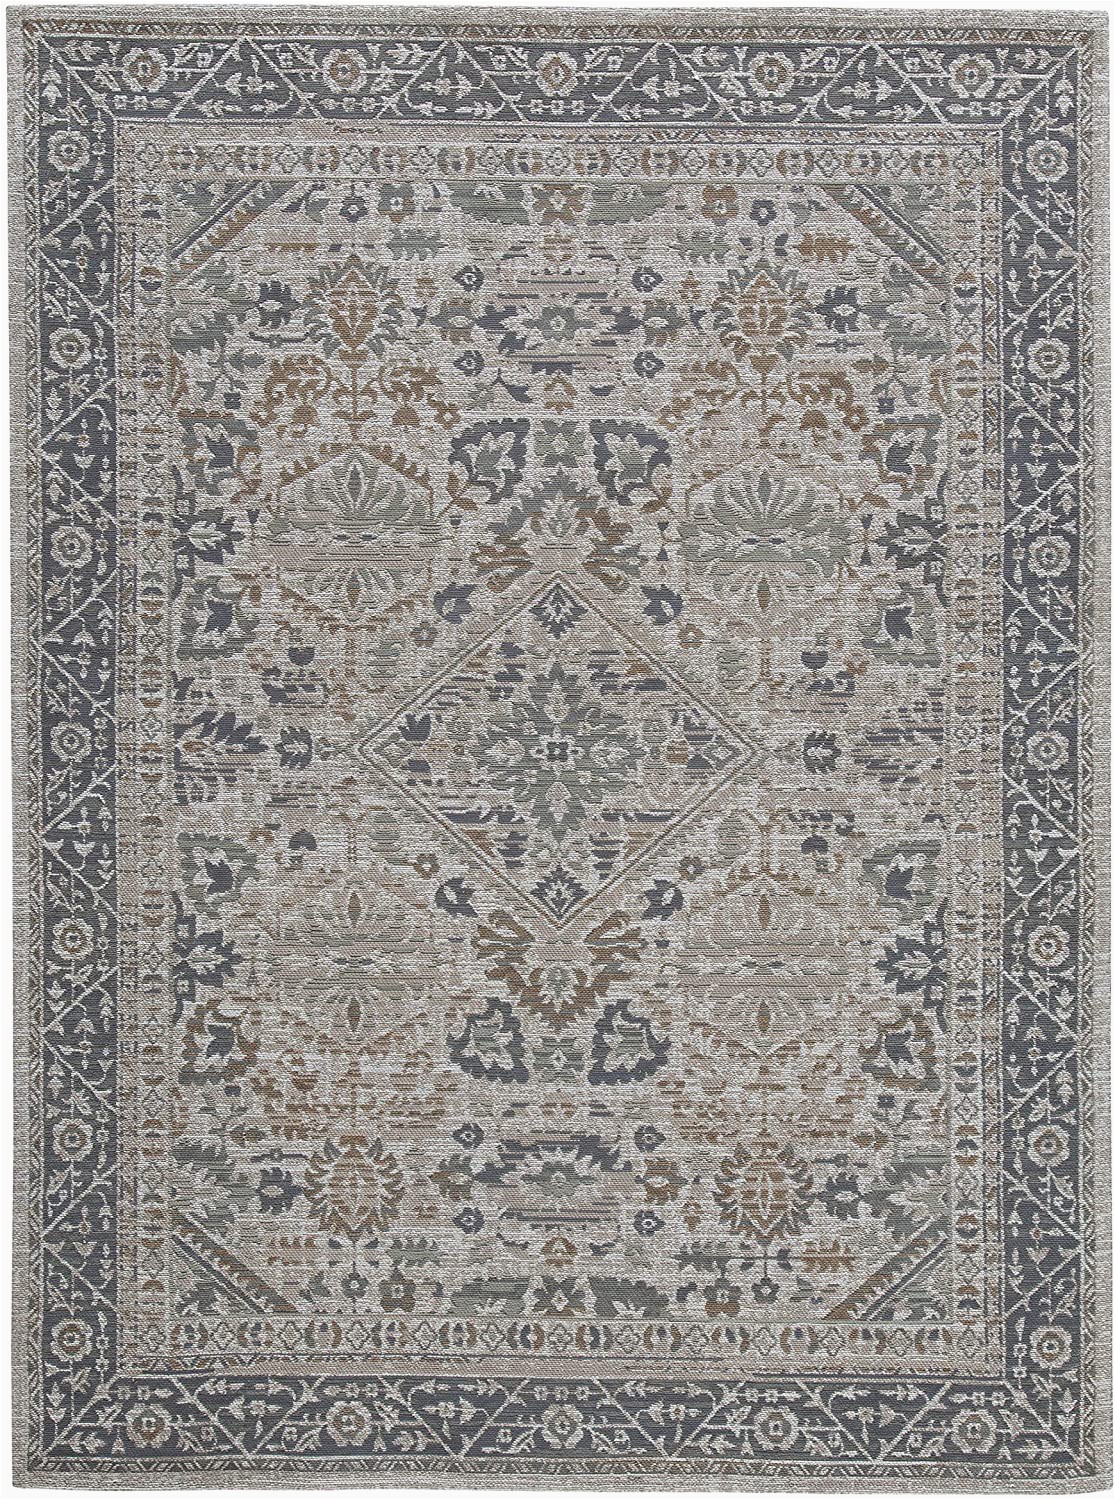 Buy now Pay Later area Rugs Signature Design by ashley Hetty Rug Multi